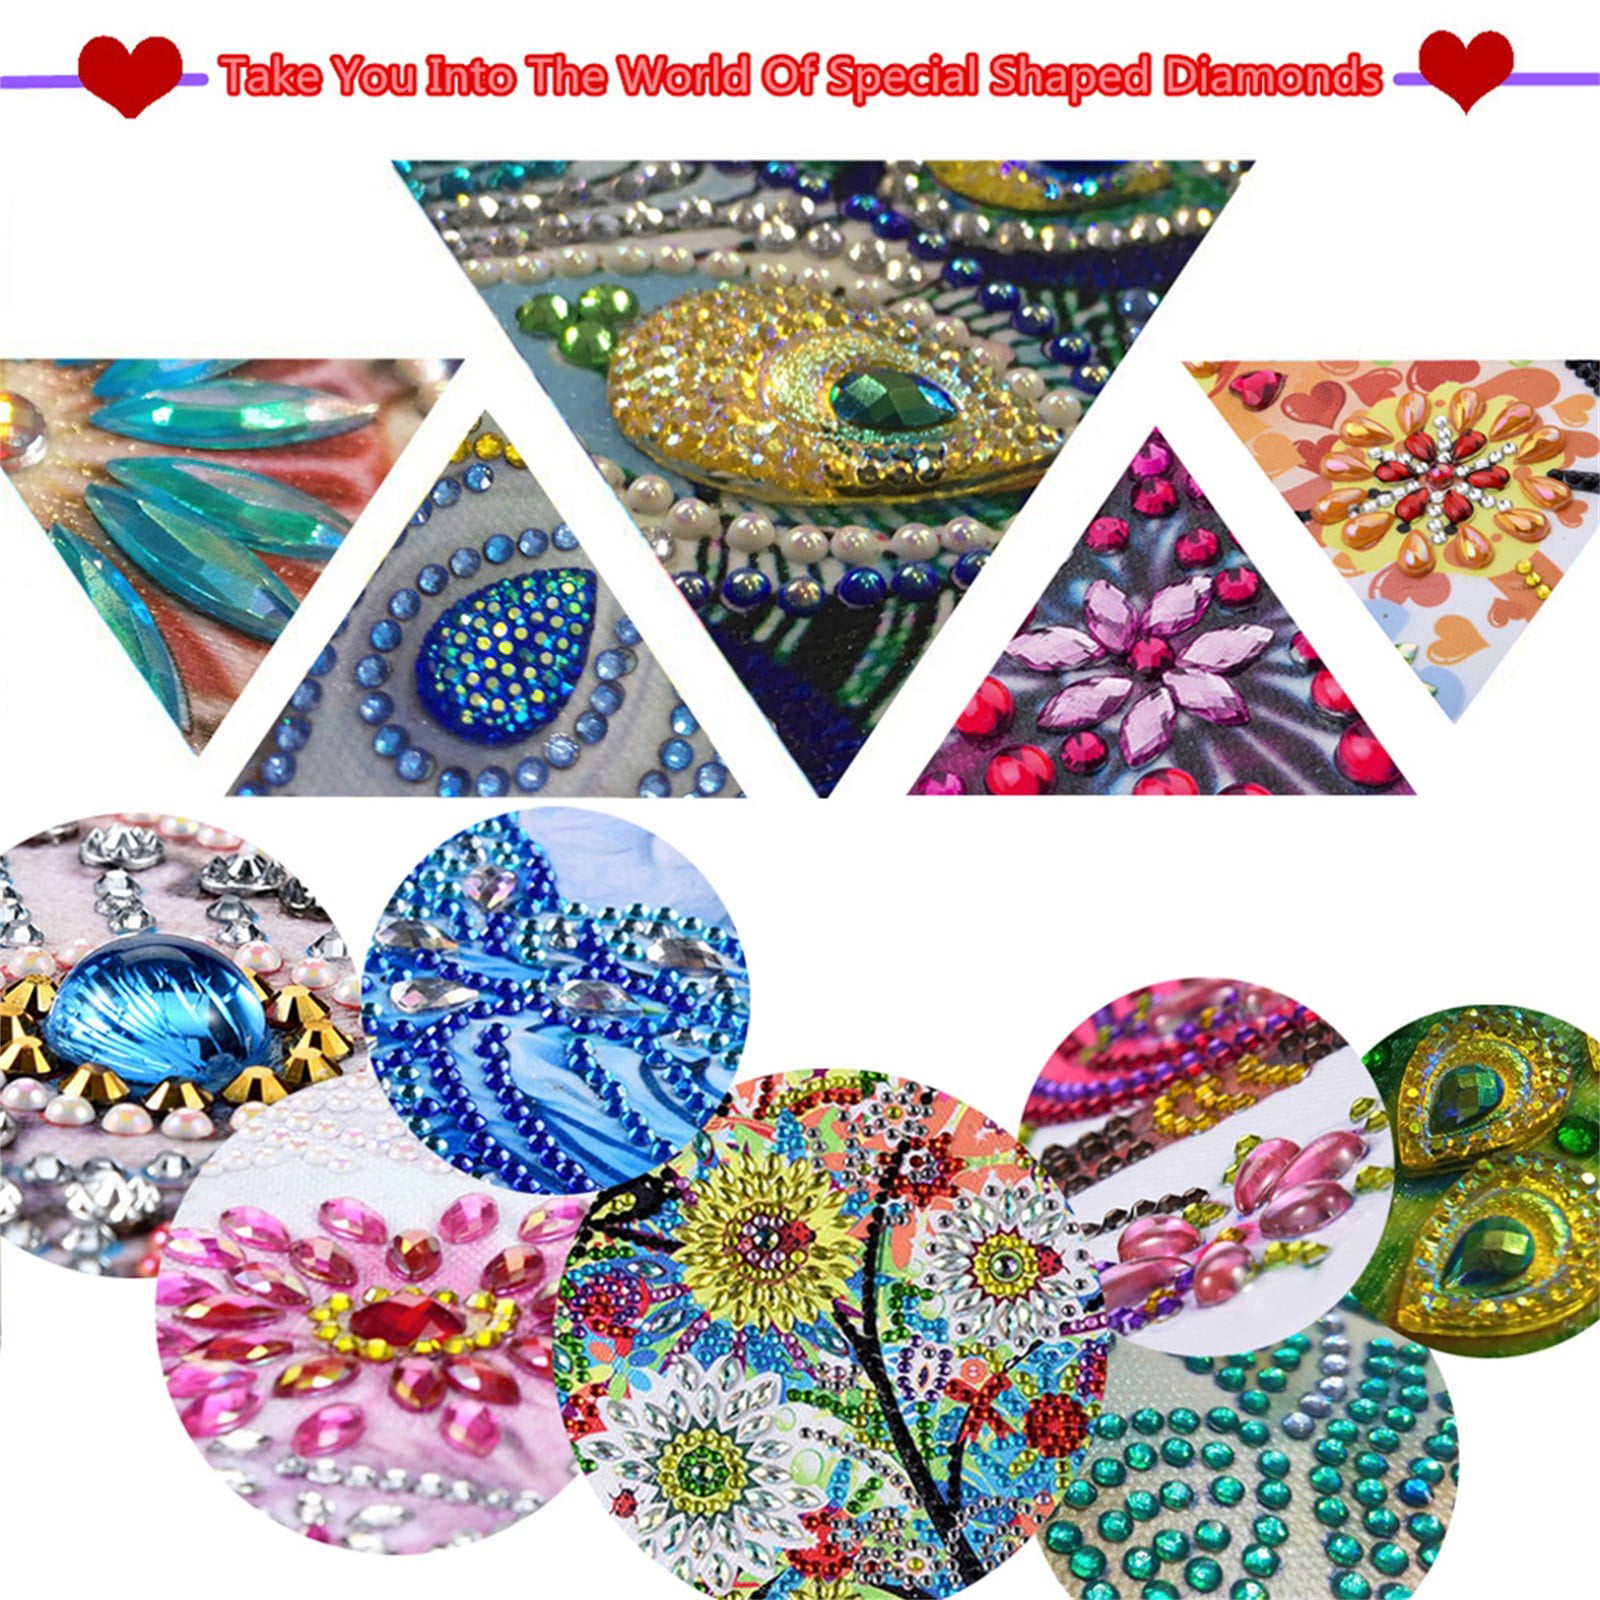 Pianpianzi 3d Diamond Puzzles for Adults Young Adult Crafts for Women Cat  Bookmark for Adults Diamond Paintings DIY Embroidery Pasted Painting 5D